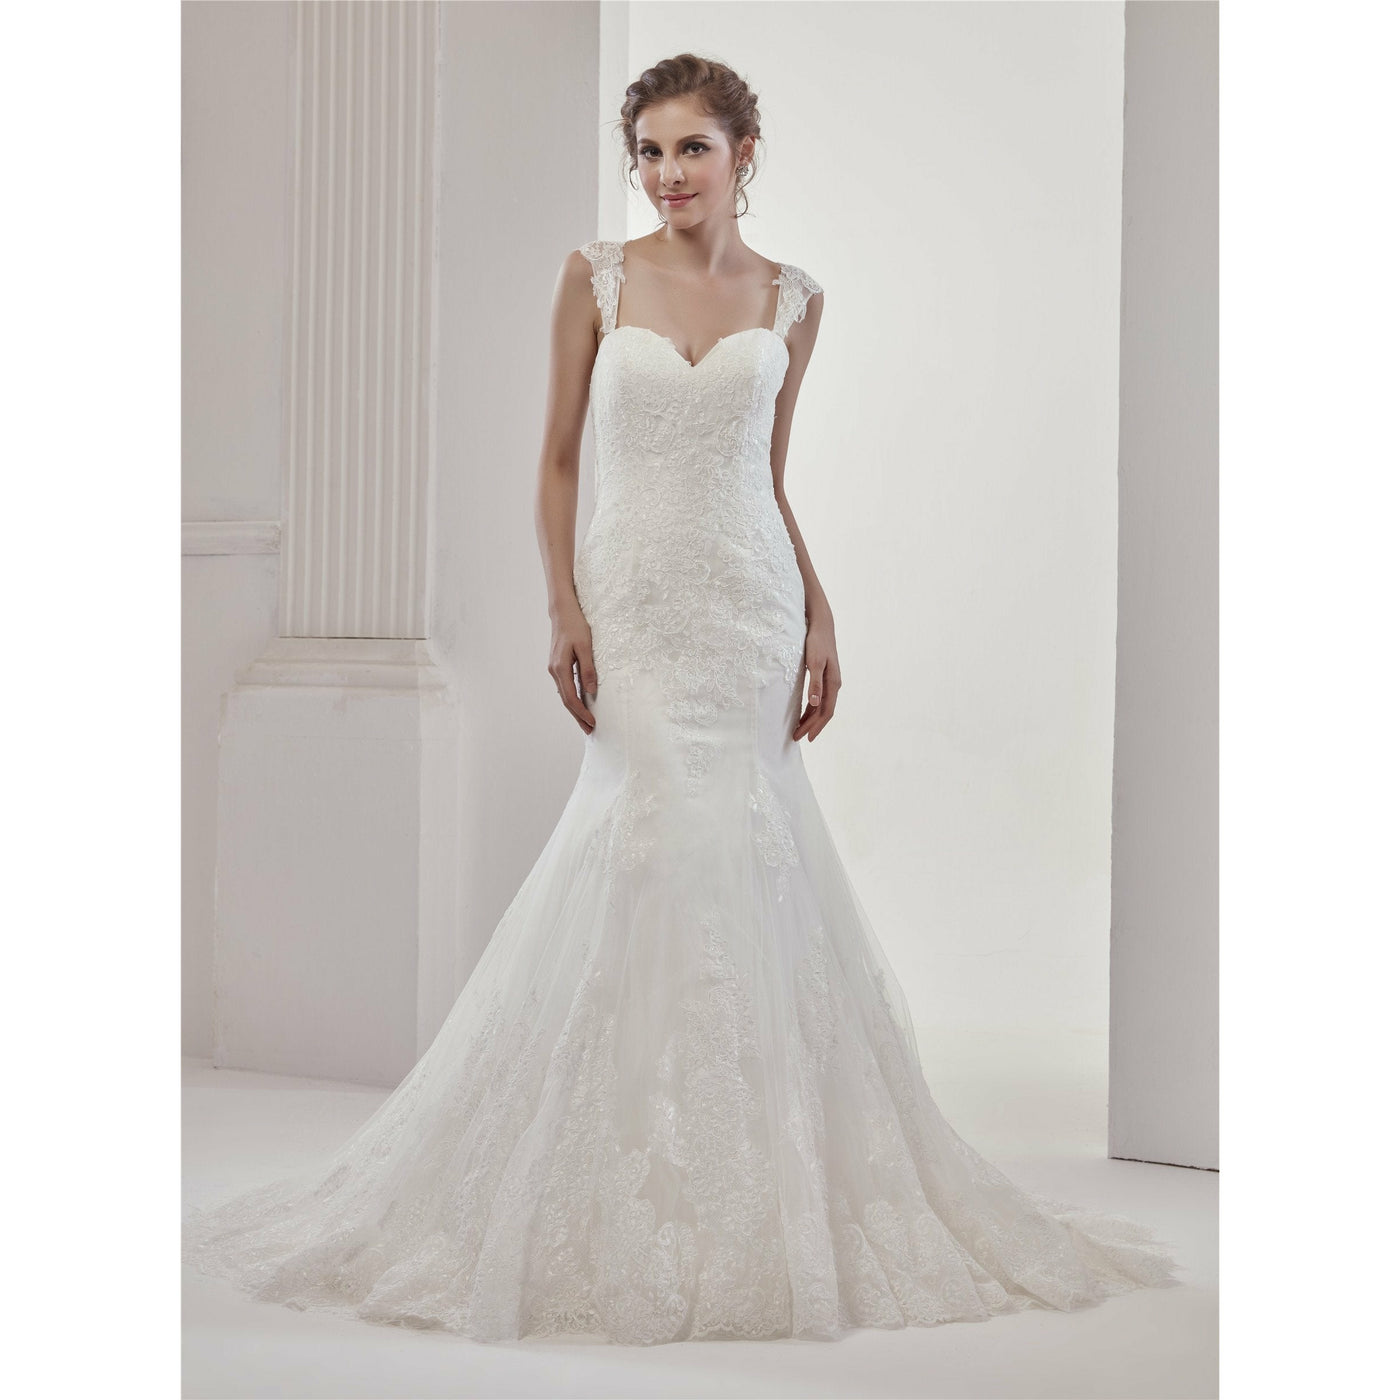 Chicely sweetheart chantilly lace mermaid wedding dress